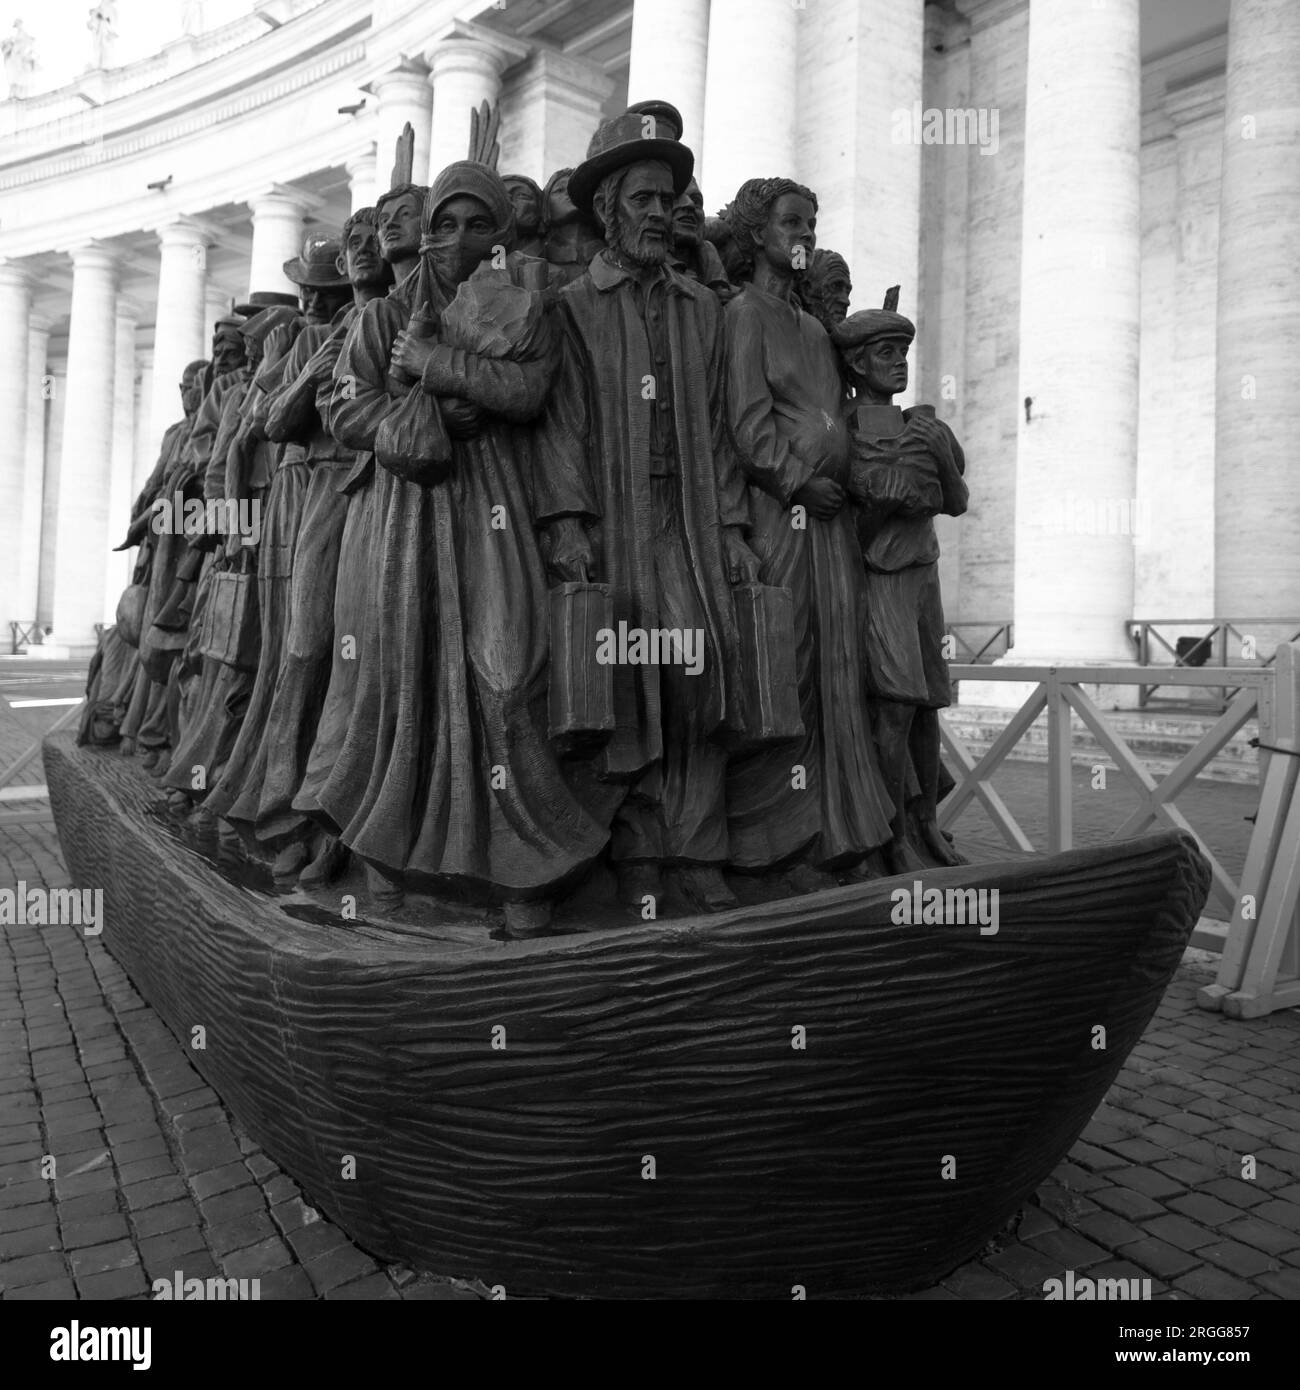 A bronze sculpture by Timothy Schmalz called 'Angels Unawares' - installed in St. Peter's Square in 2019 for World Day of Migrants and Refugees. Stock Photo